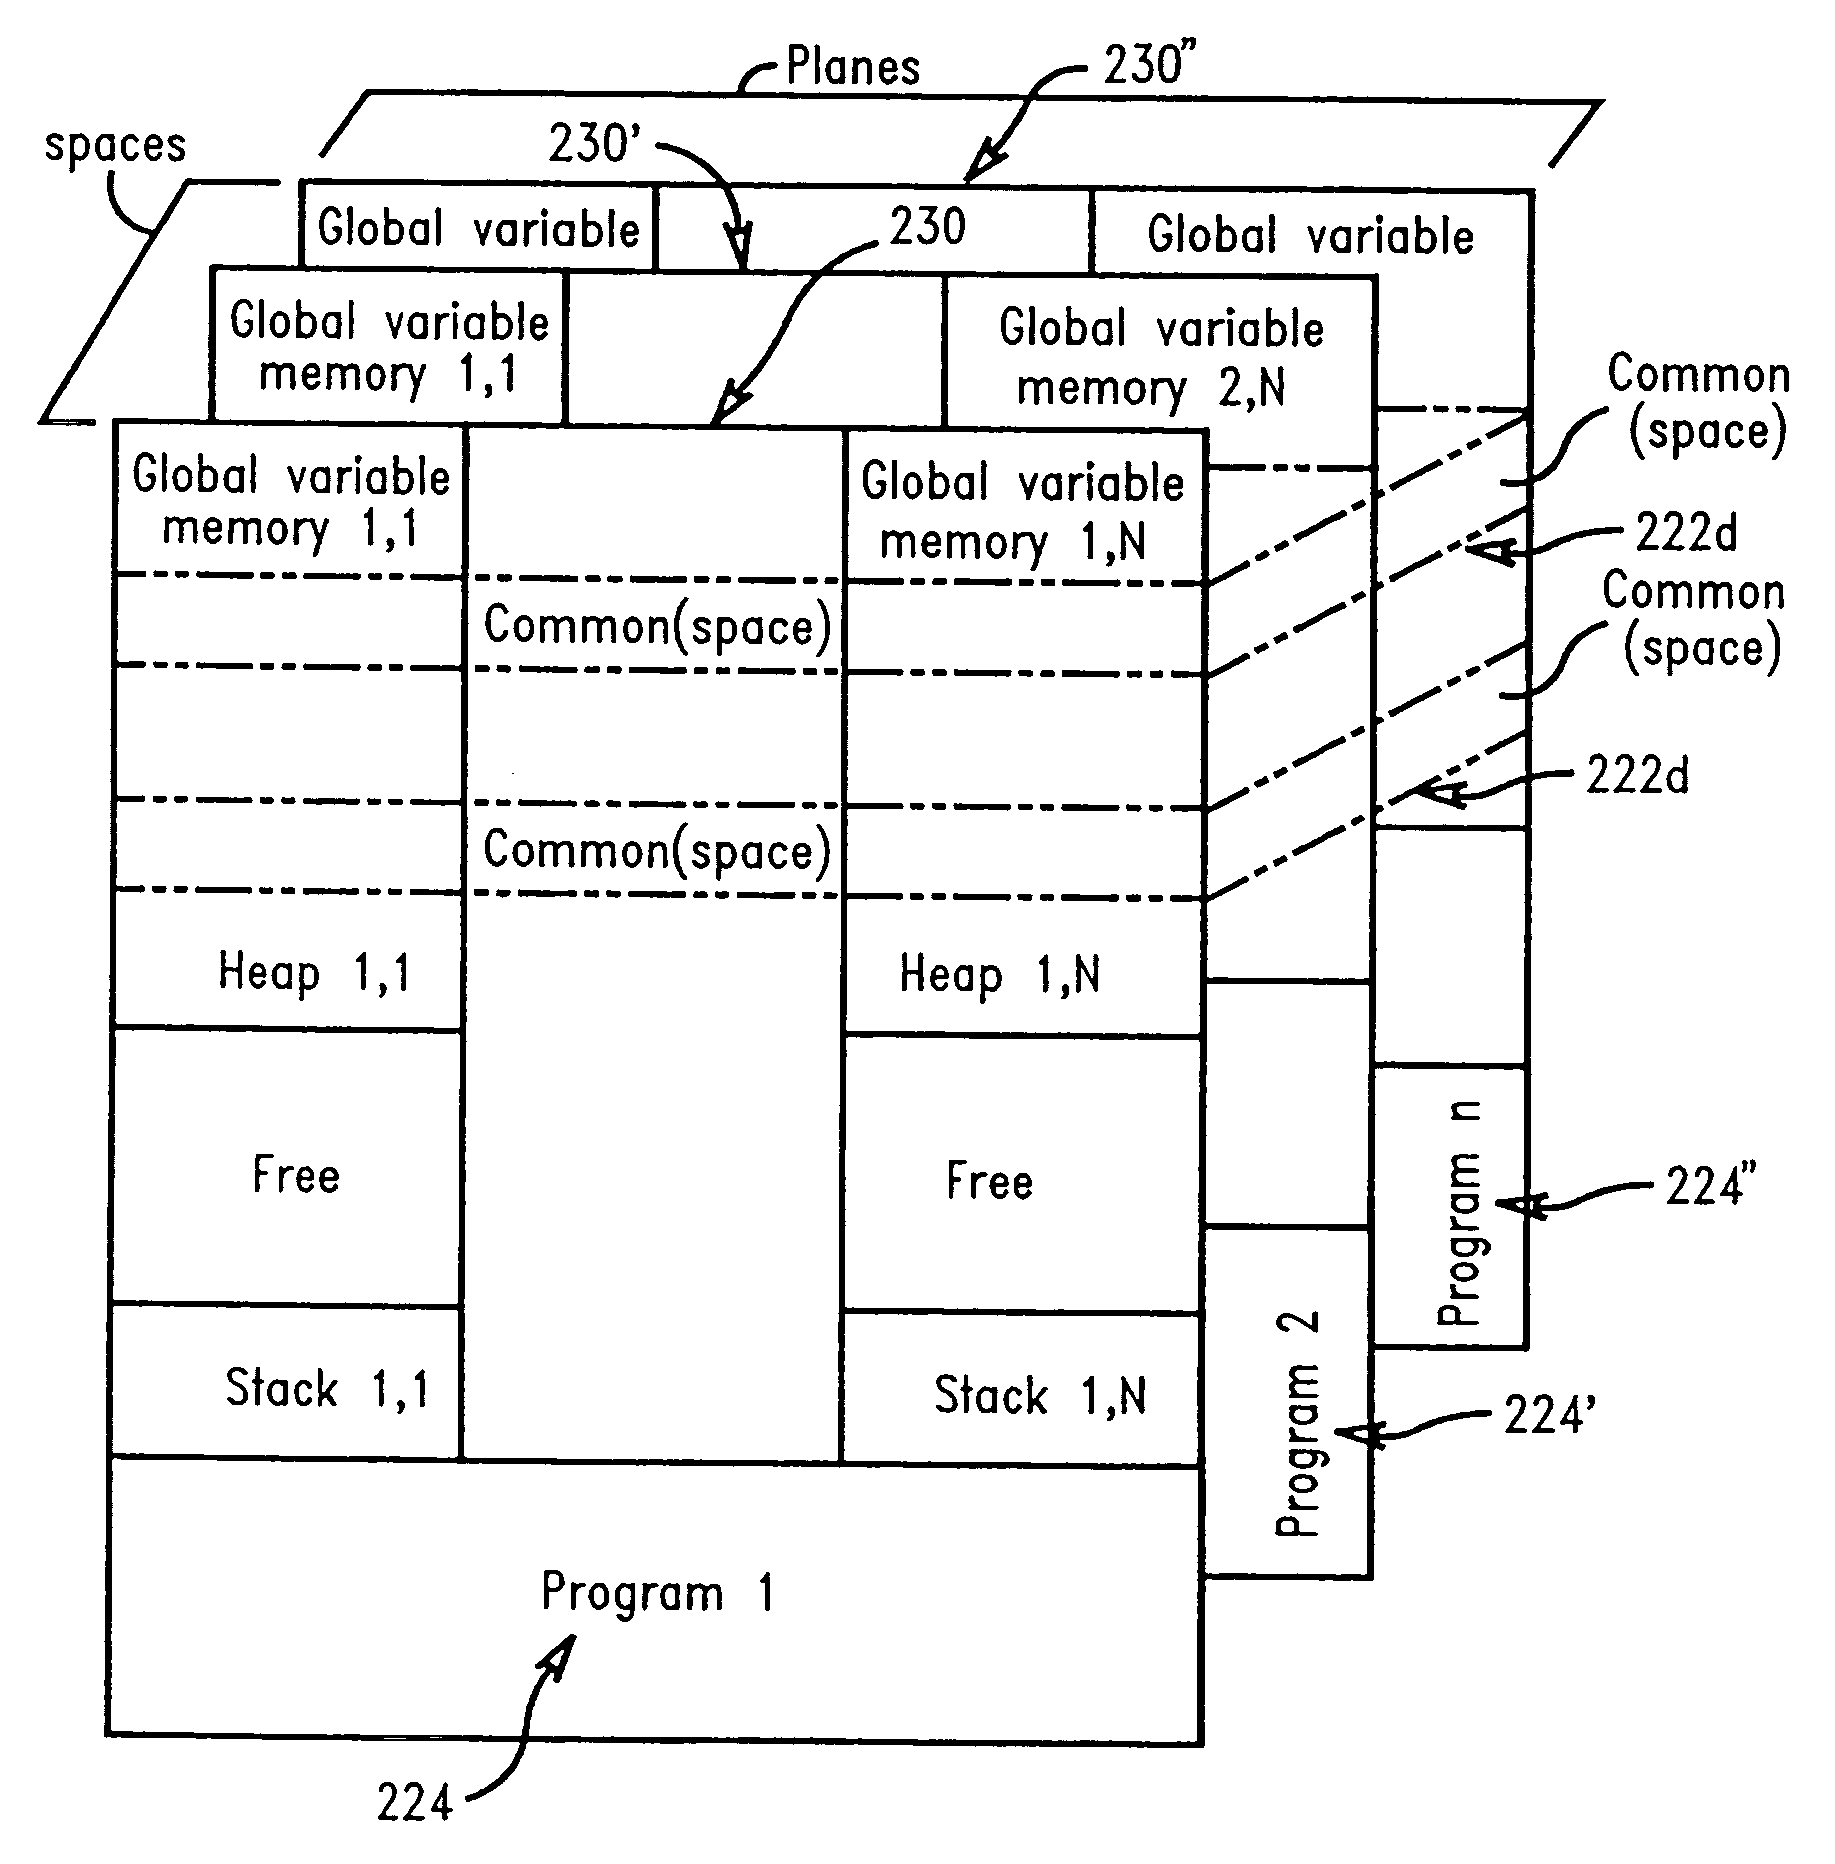 Method of using a distinct flow of computational control as a reusable abstract data object